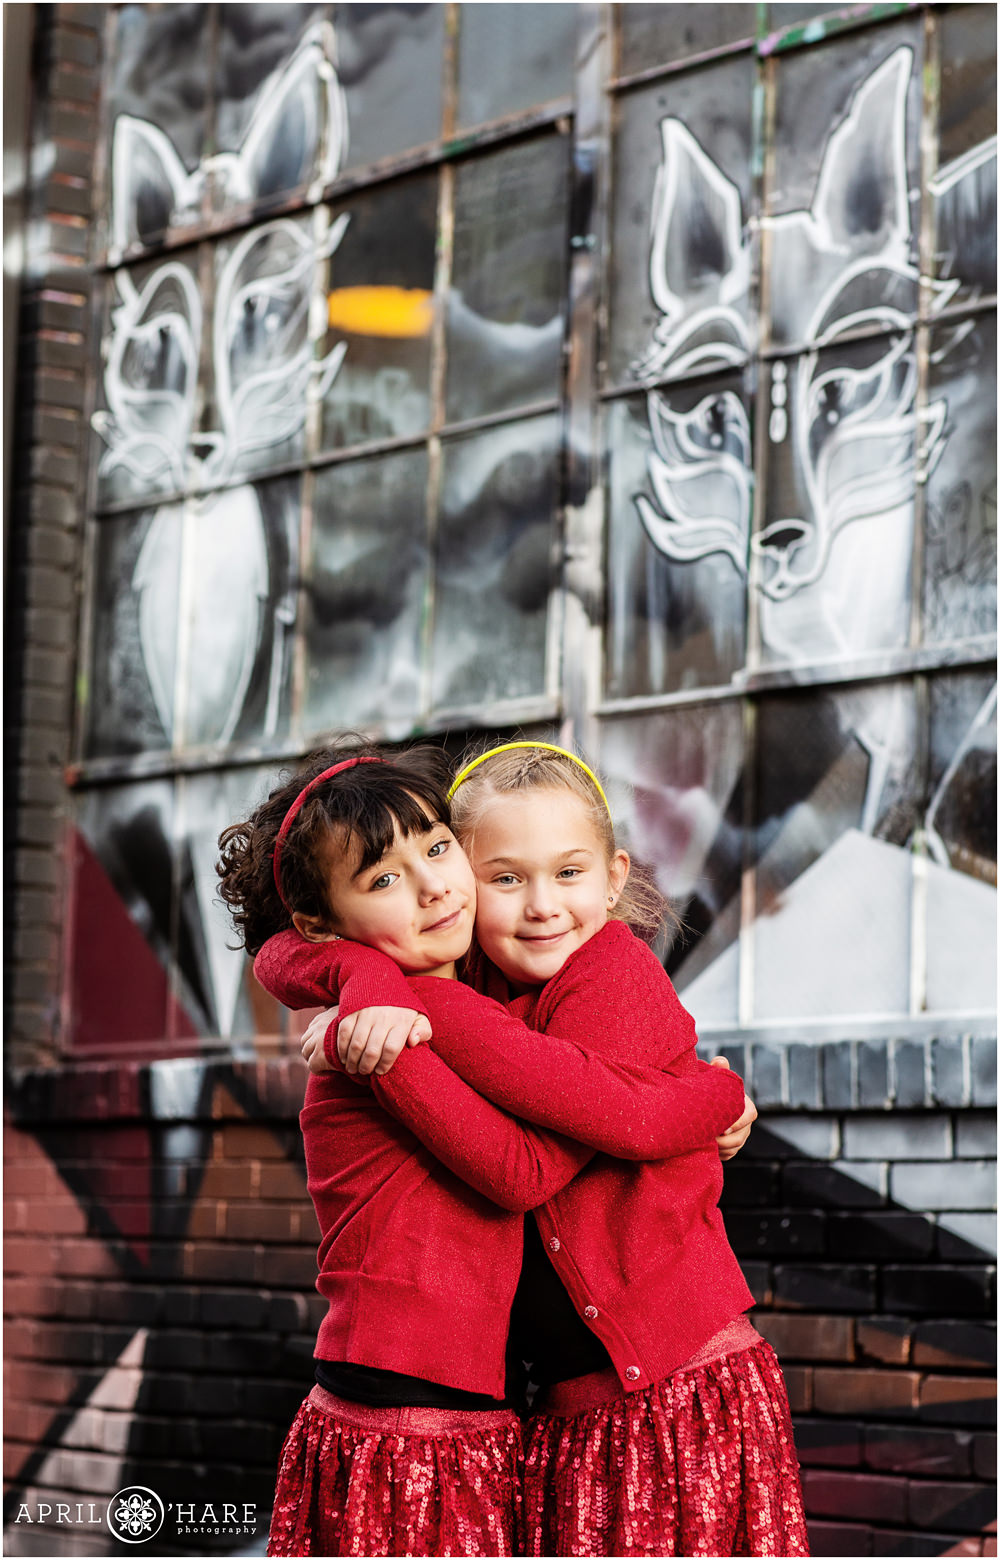 Adorable sister picture with cute foxes street art in alley behind Central Market in Rino area of Denver Colorado